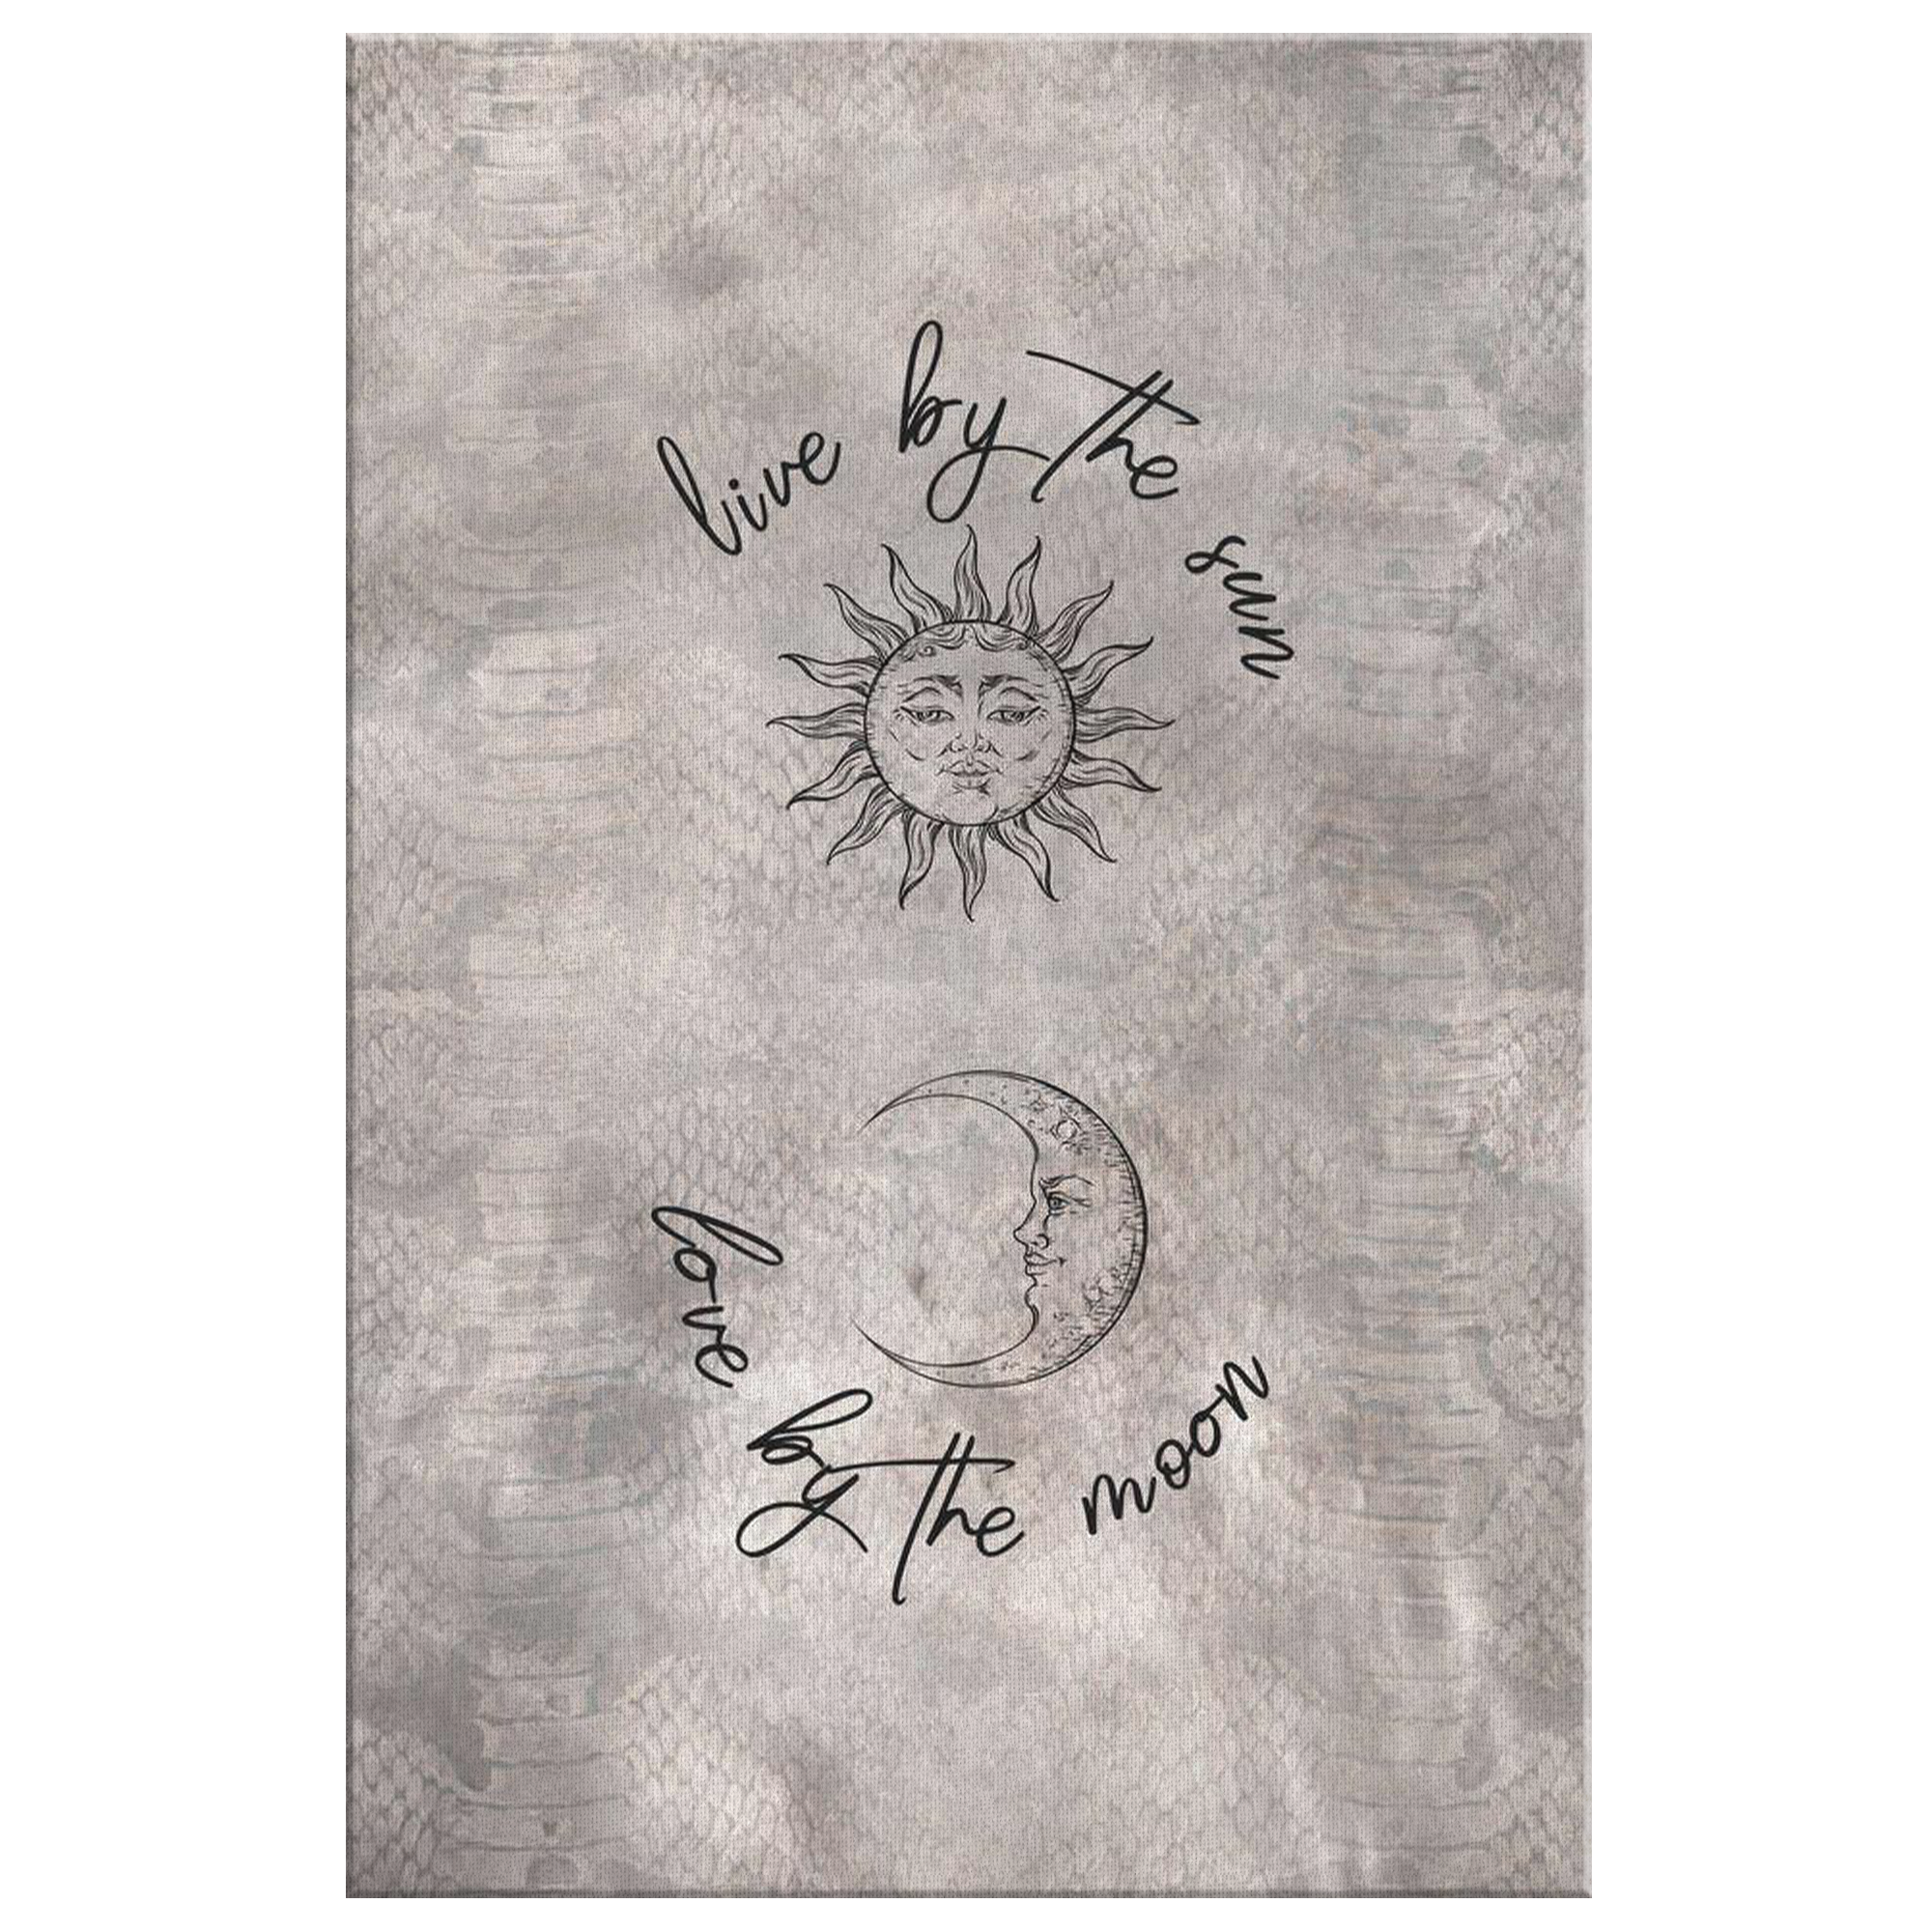 "Live By The Sun, Love By The Moon" Premium Canvas